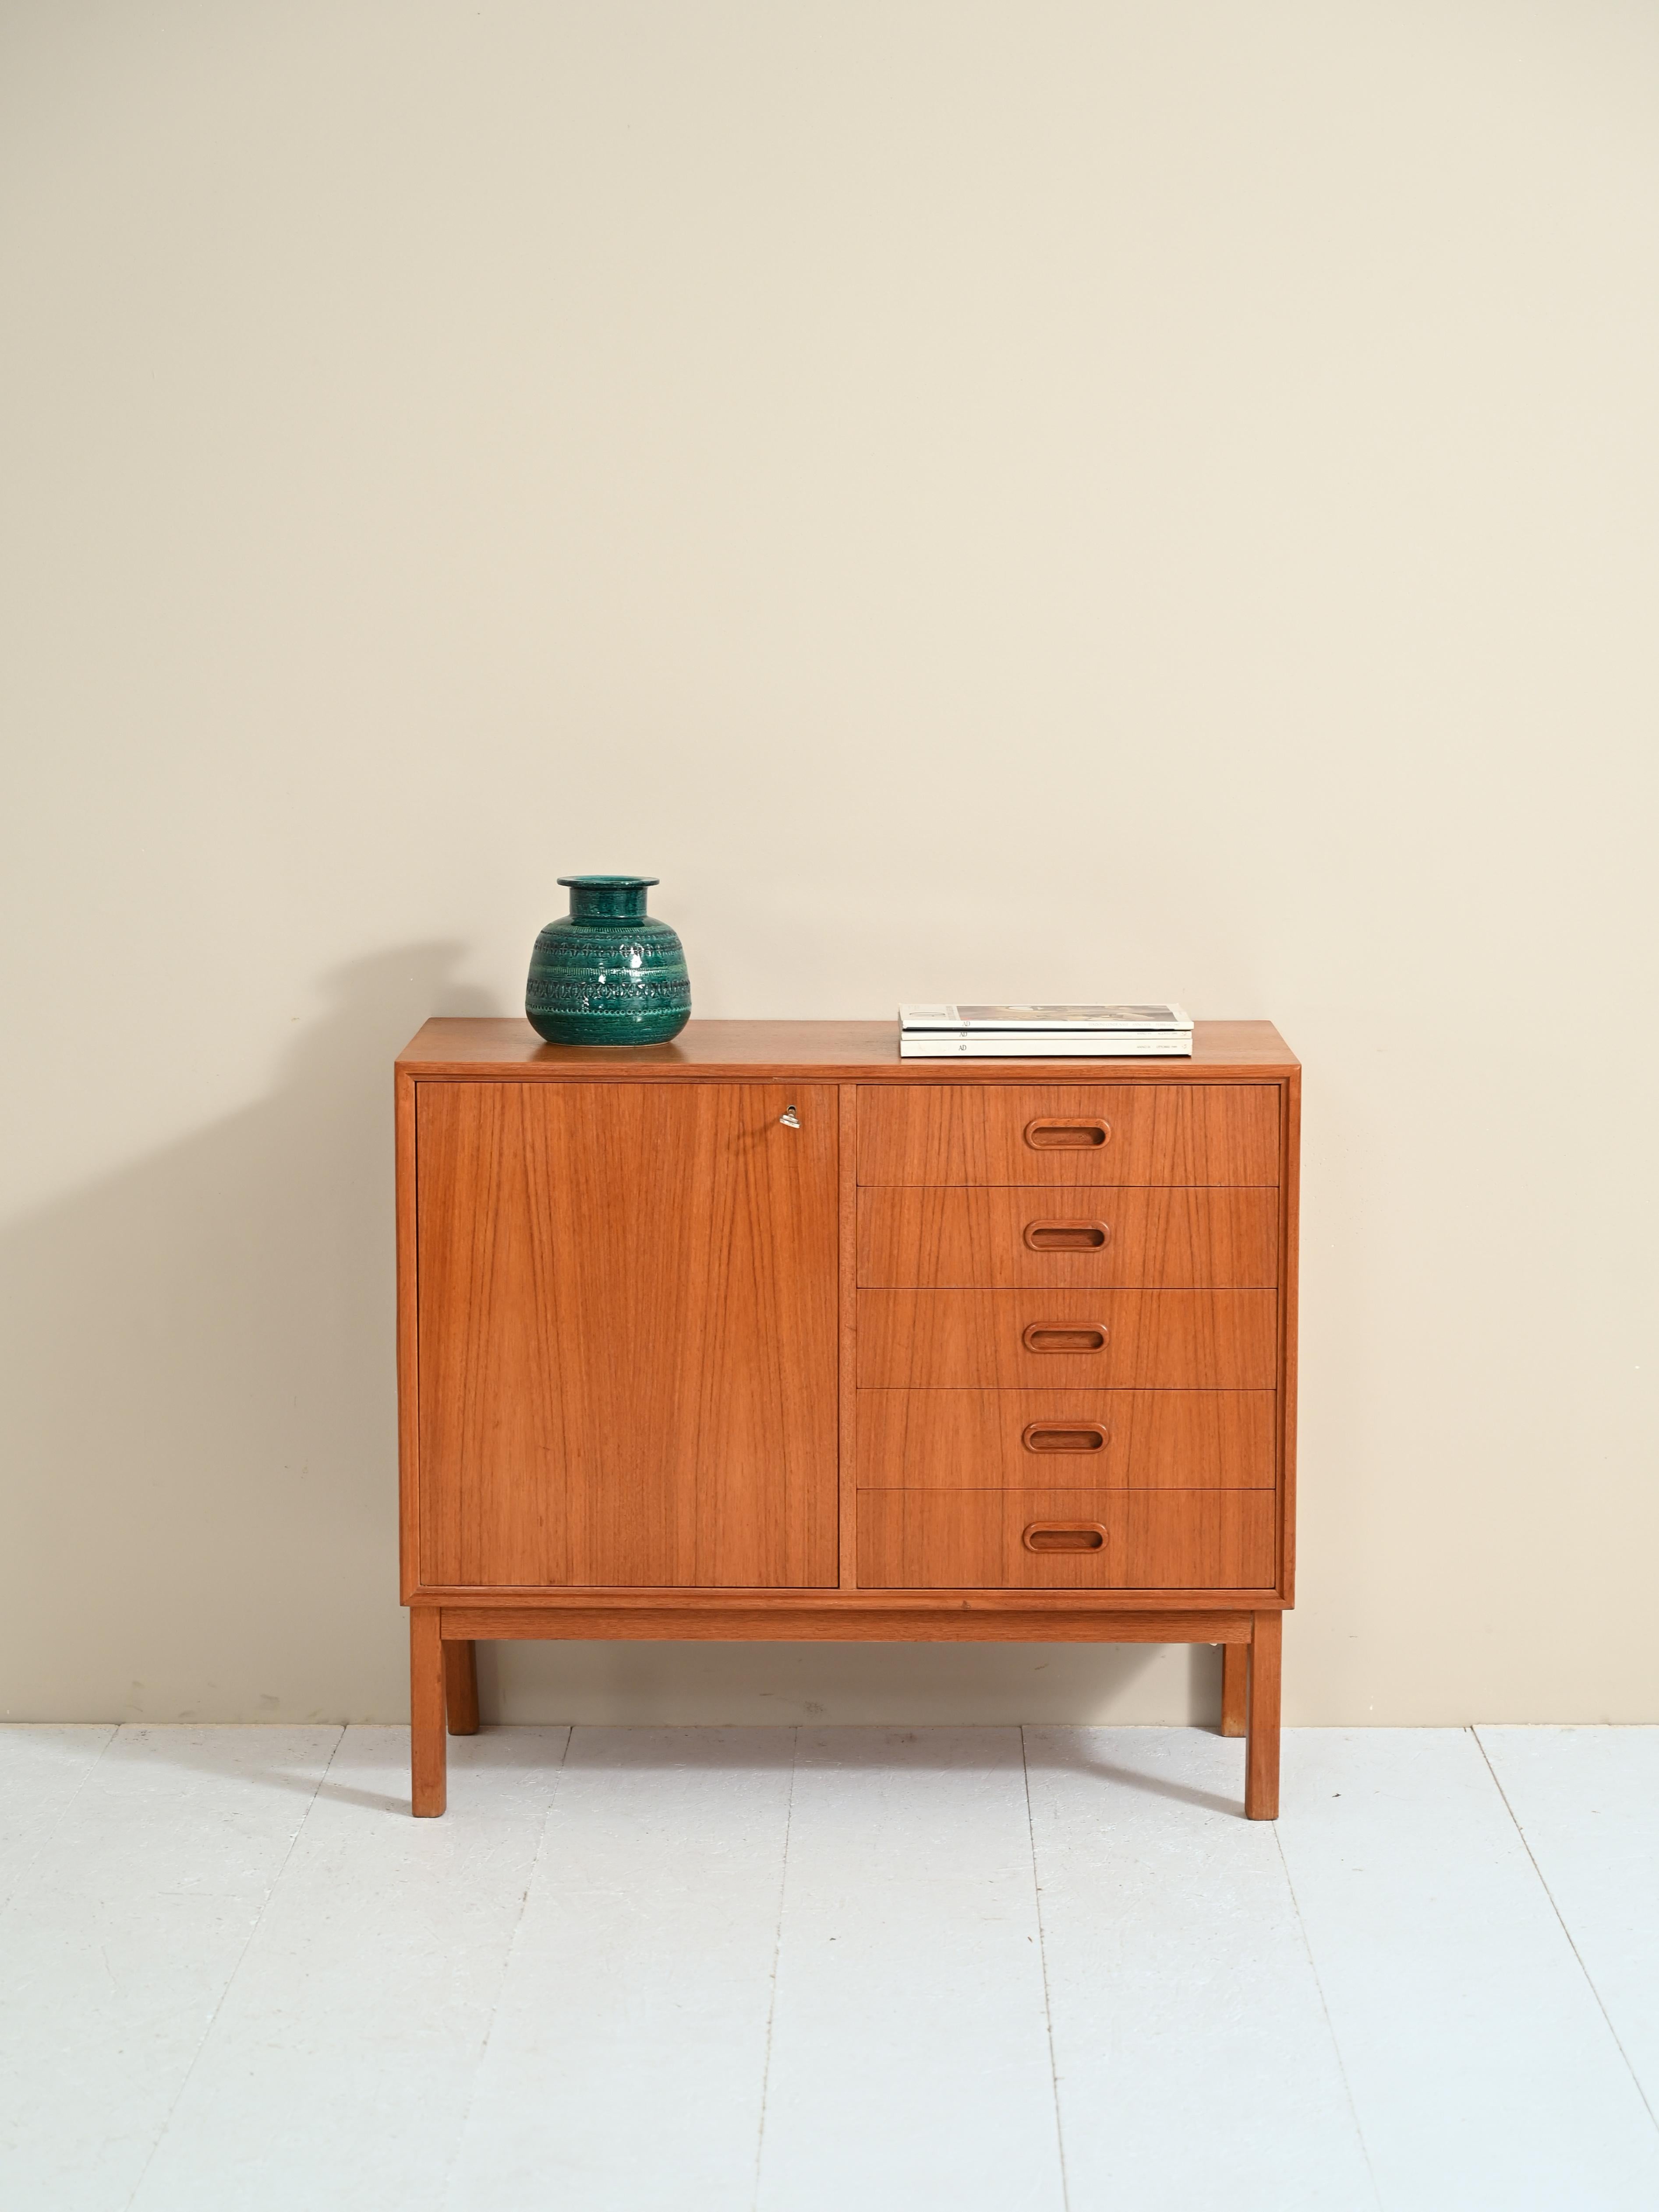 Small sideboard with drawers and storage compartment.
Peculiar piece of furniture of Scandinavian origin with typical shapes of the 1960s.
Inside the compartment is a shelf. The handle of the drawers is carved wood.
A versatile piece of furniture